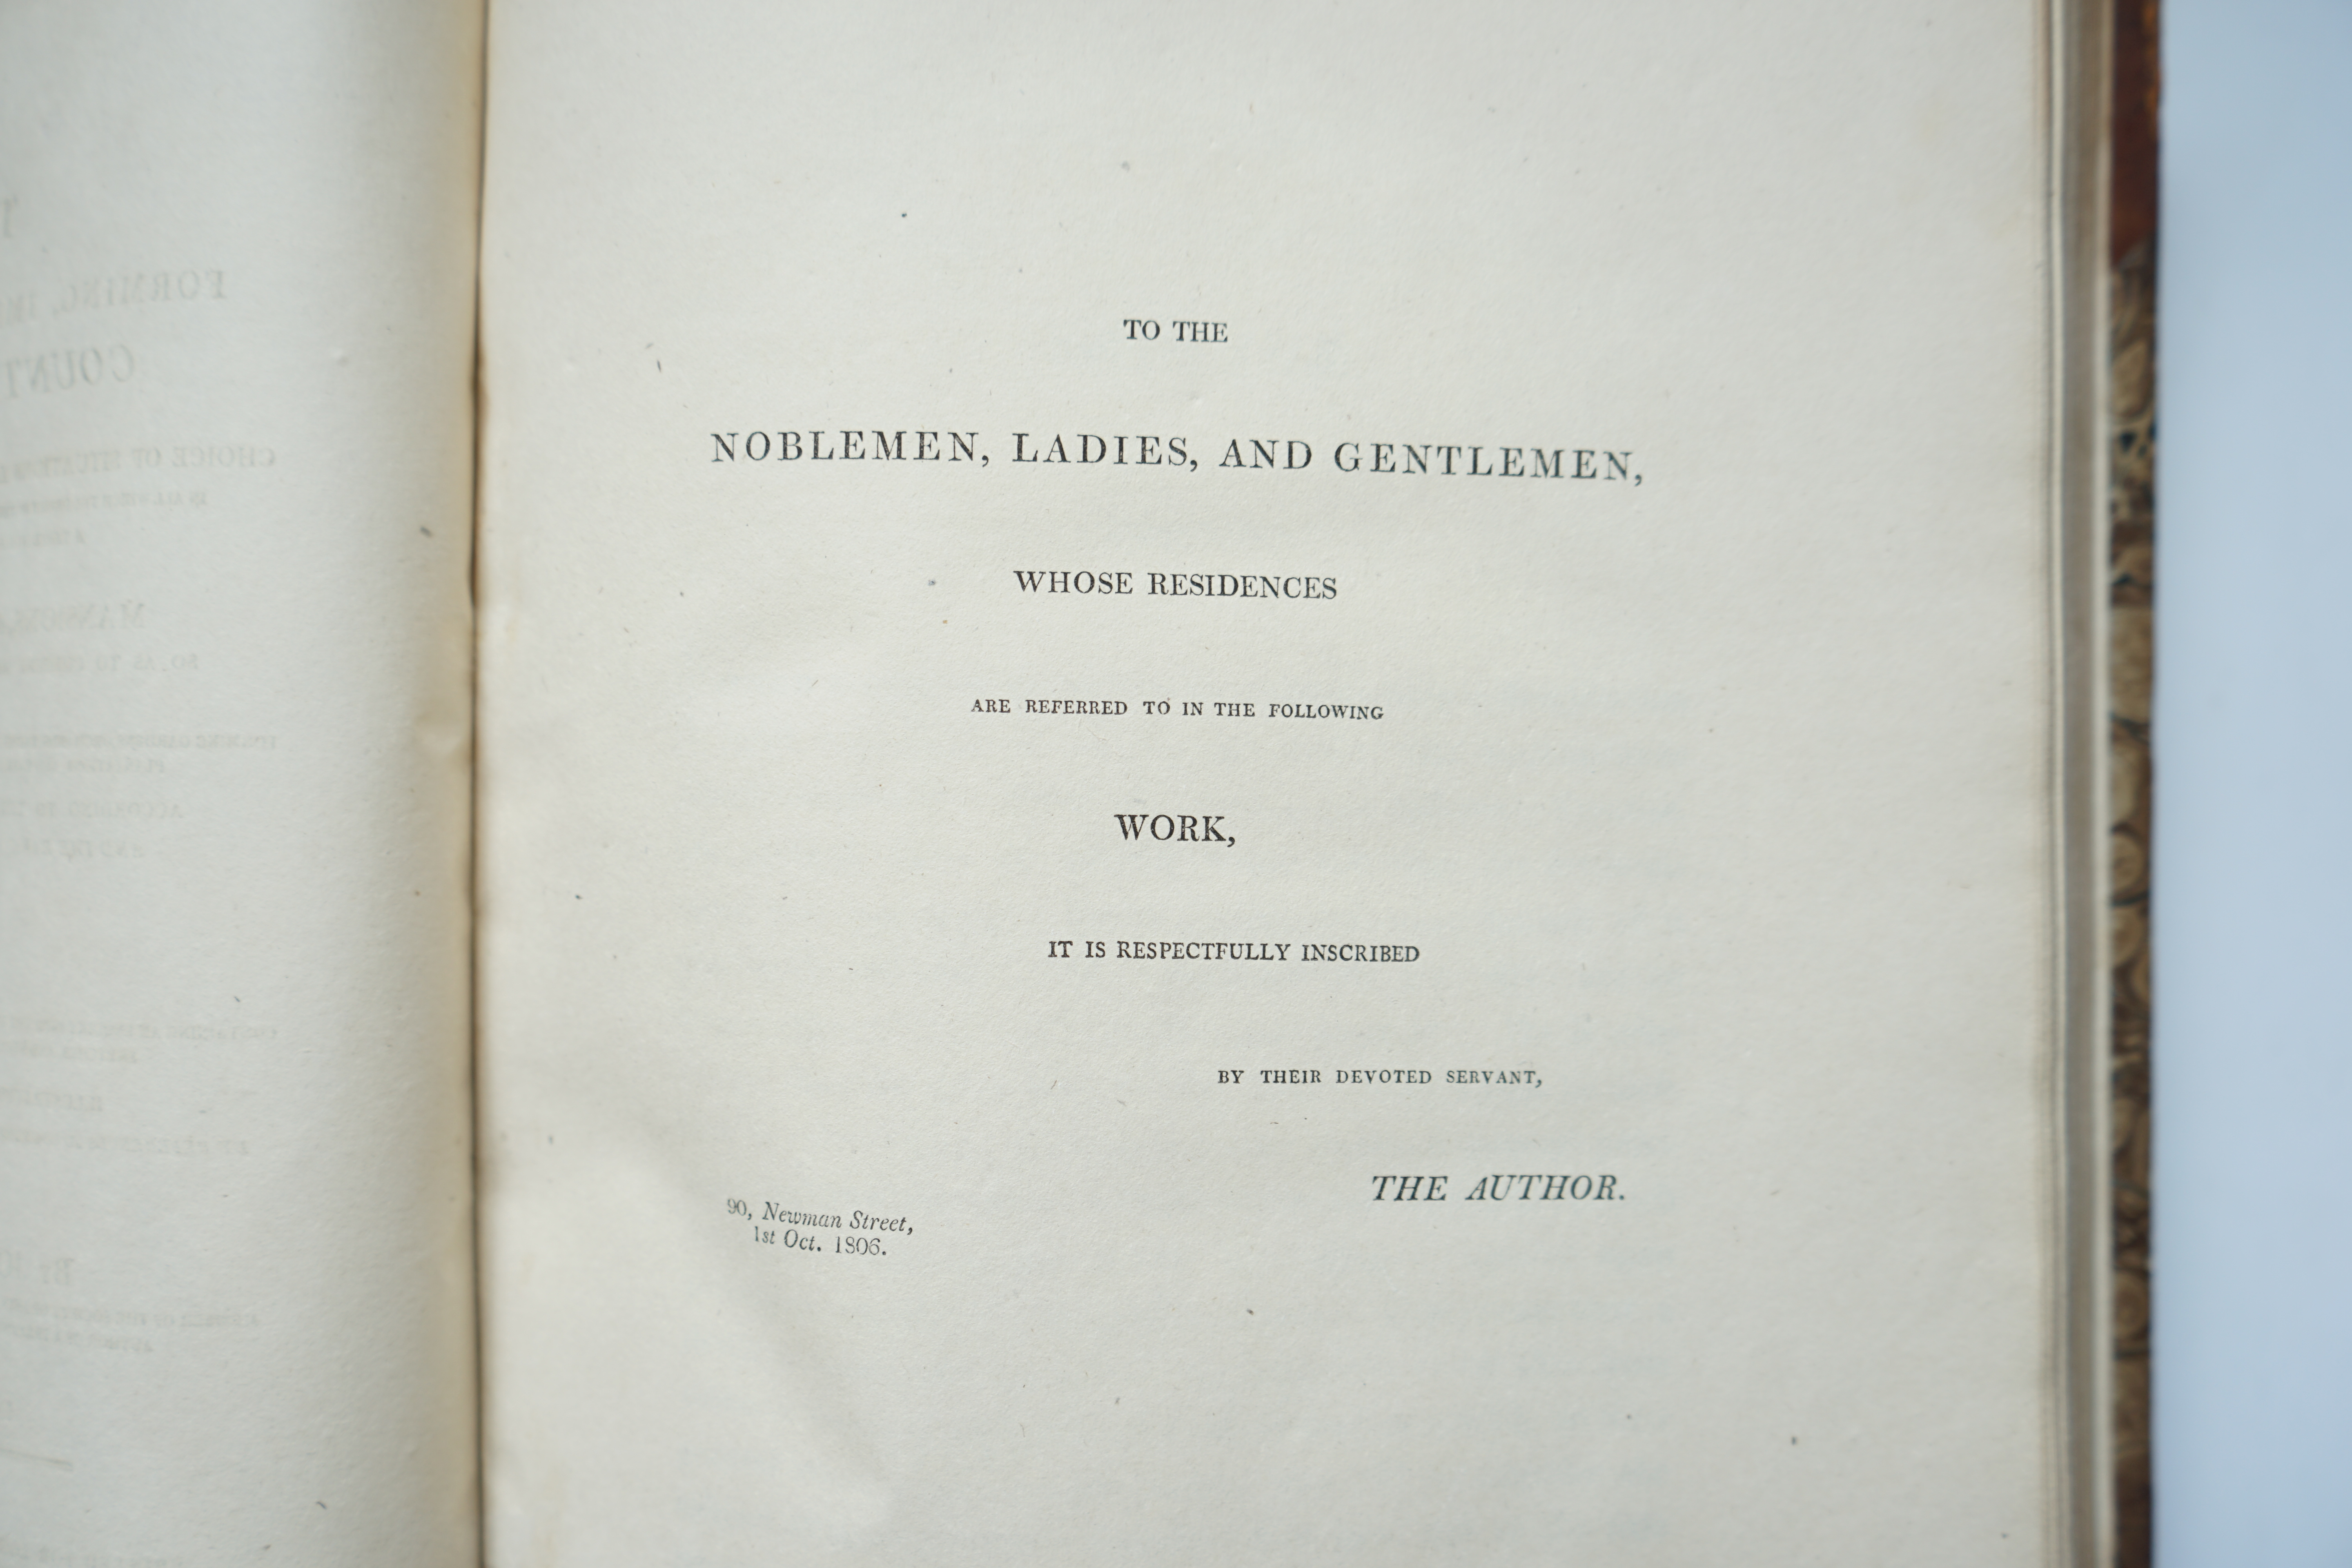 Loudon, John - A Treatise on Forming, Improving, and Managing Country Residences; Choice of Situations Appropriate to Every Class of Purchasers, 2 vols, 4to, rebound half calf, half titles, 32 engraved plates, The Societ